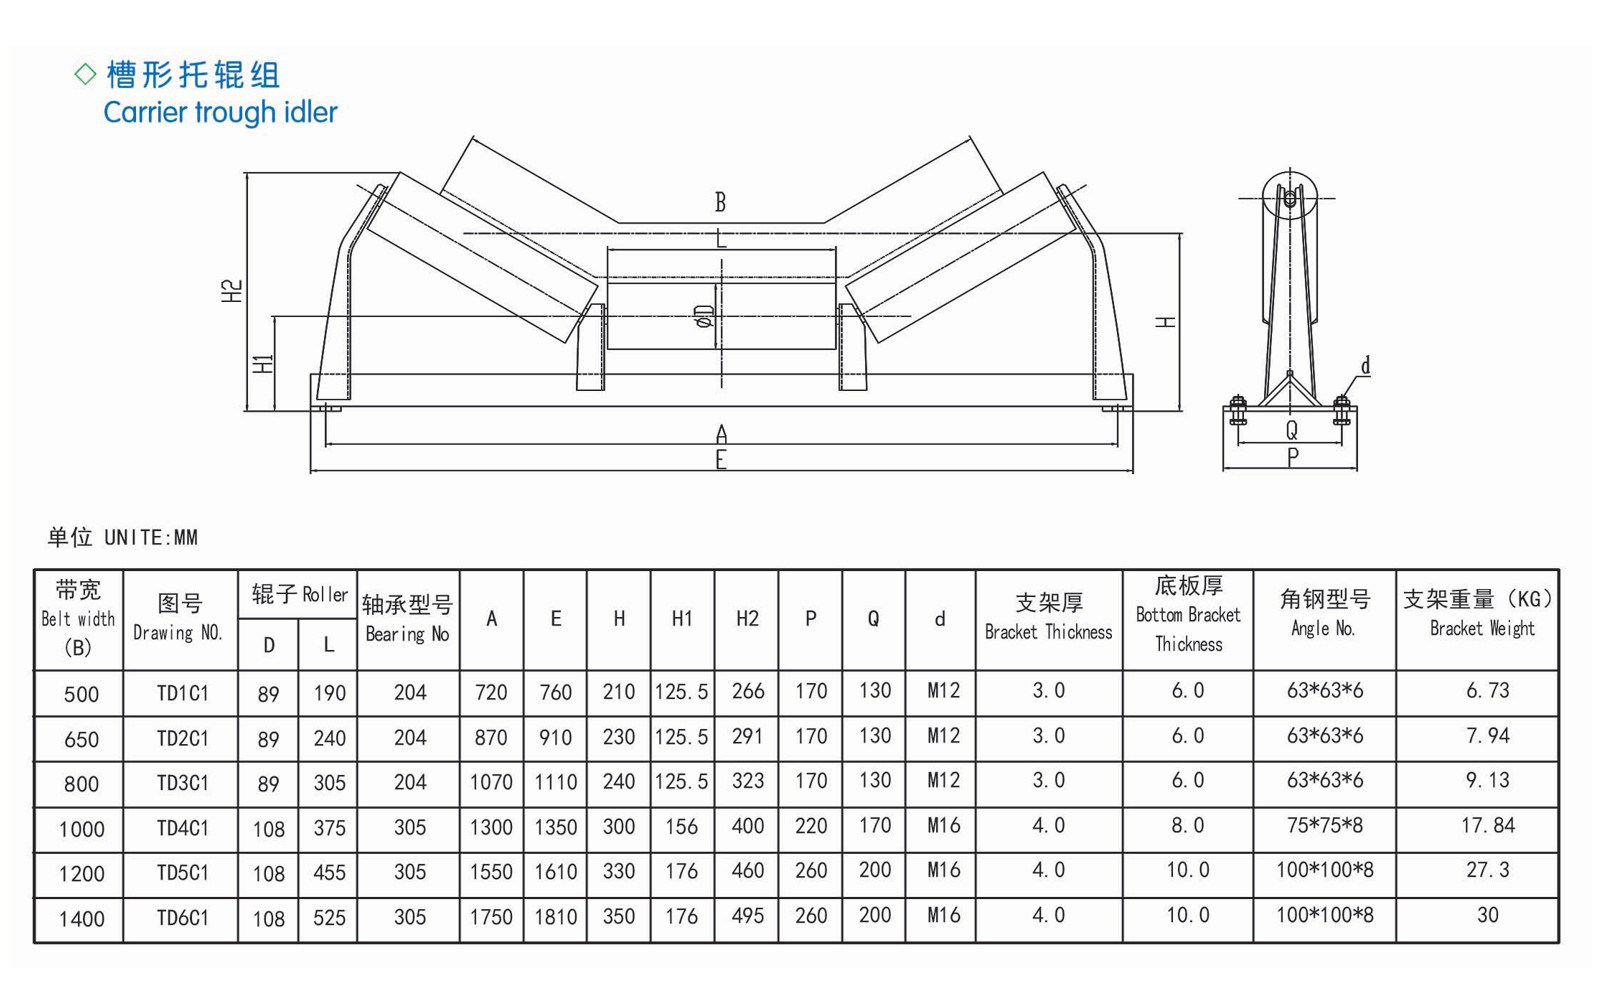 Grooved carrier roller group